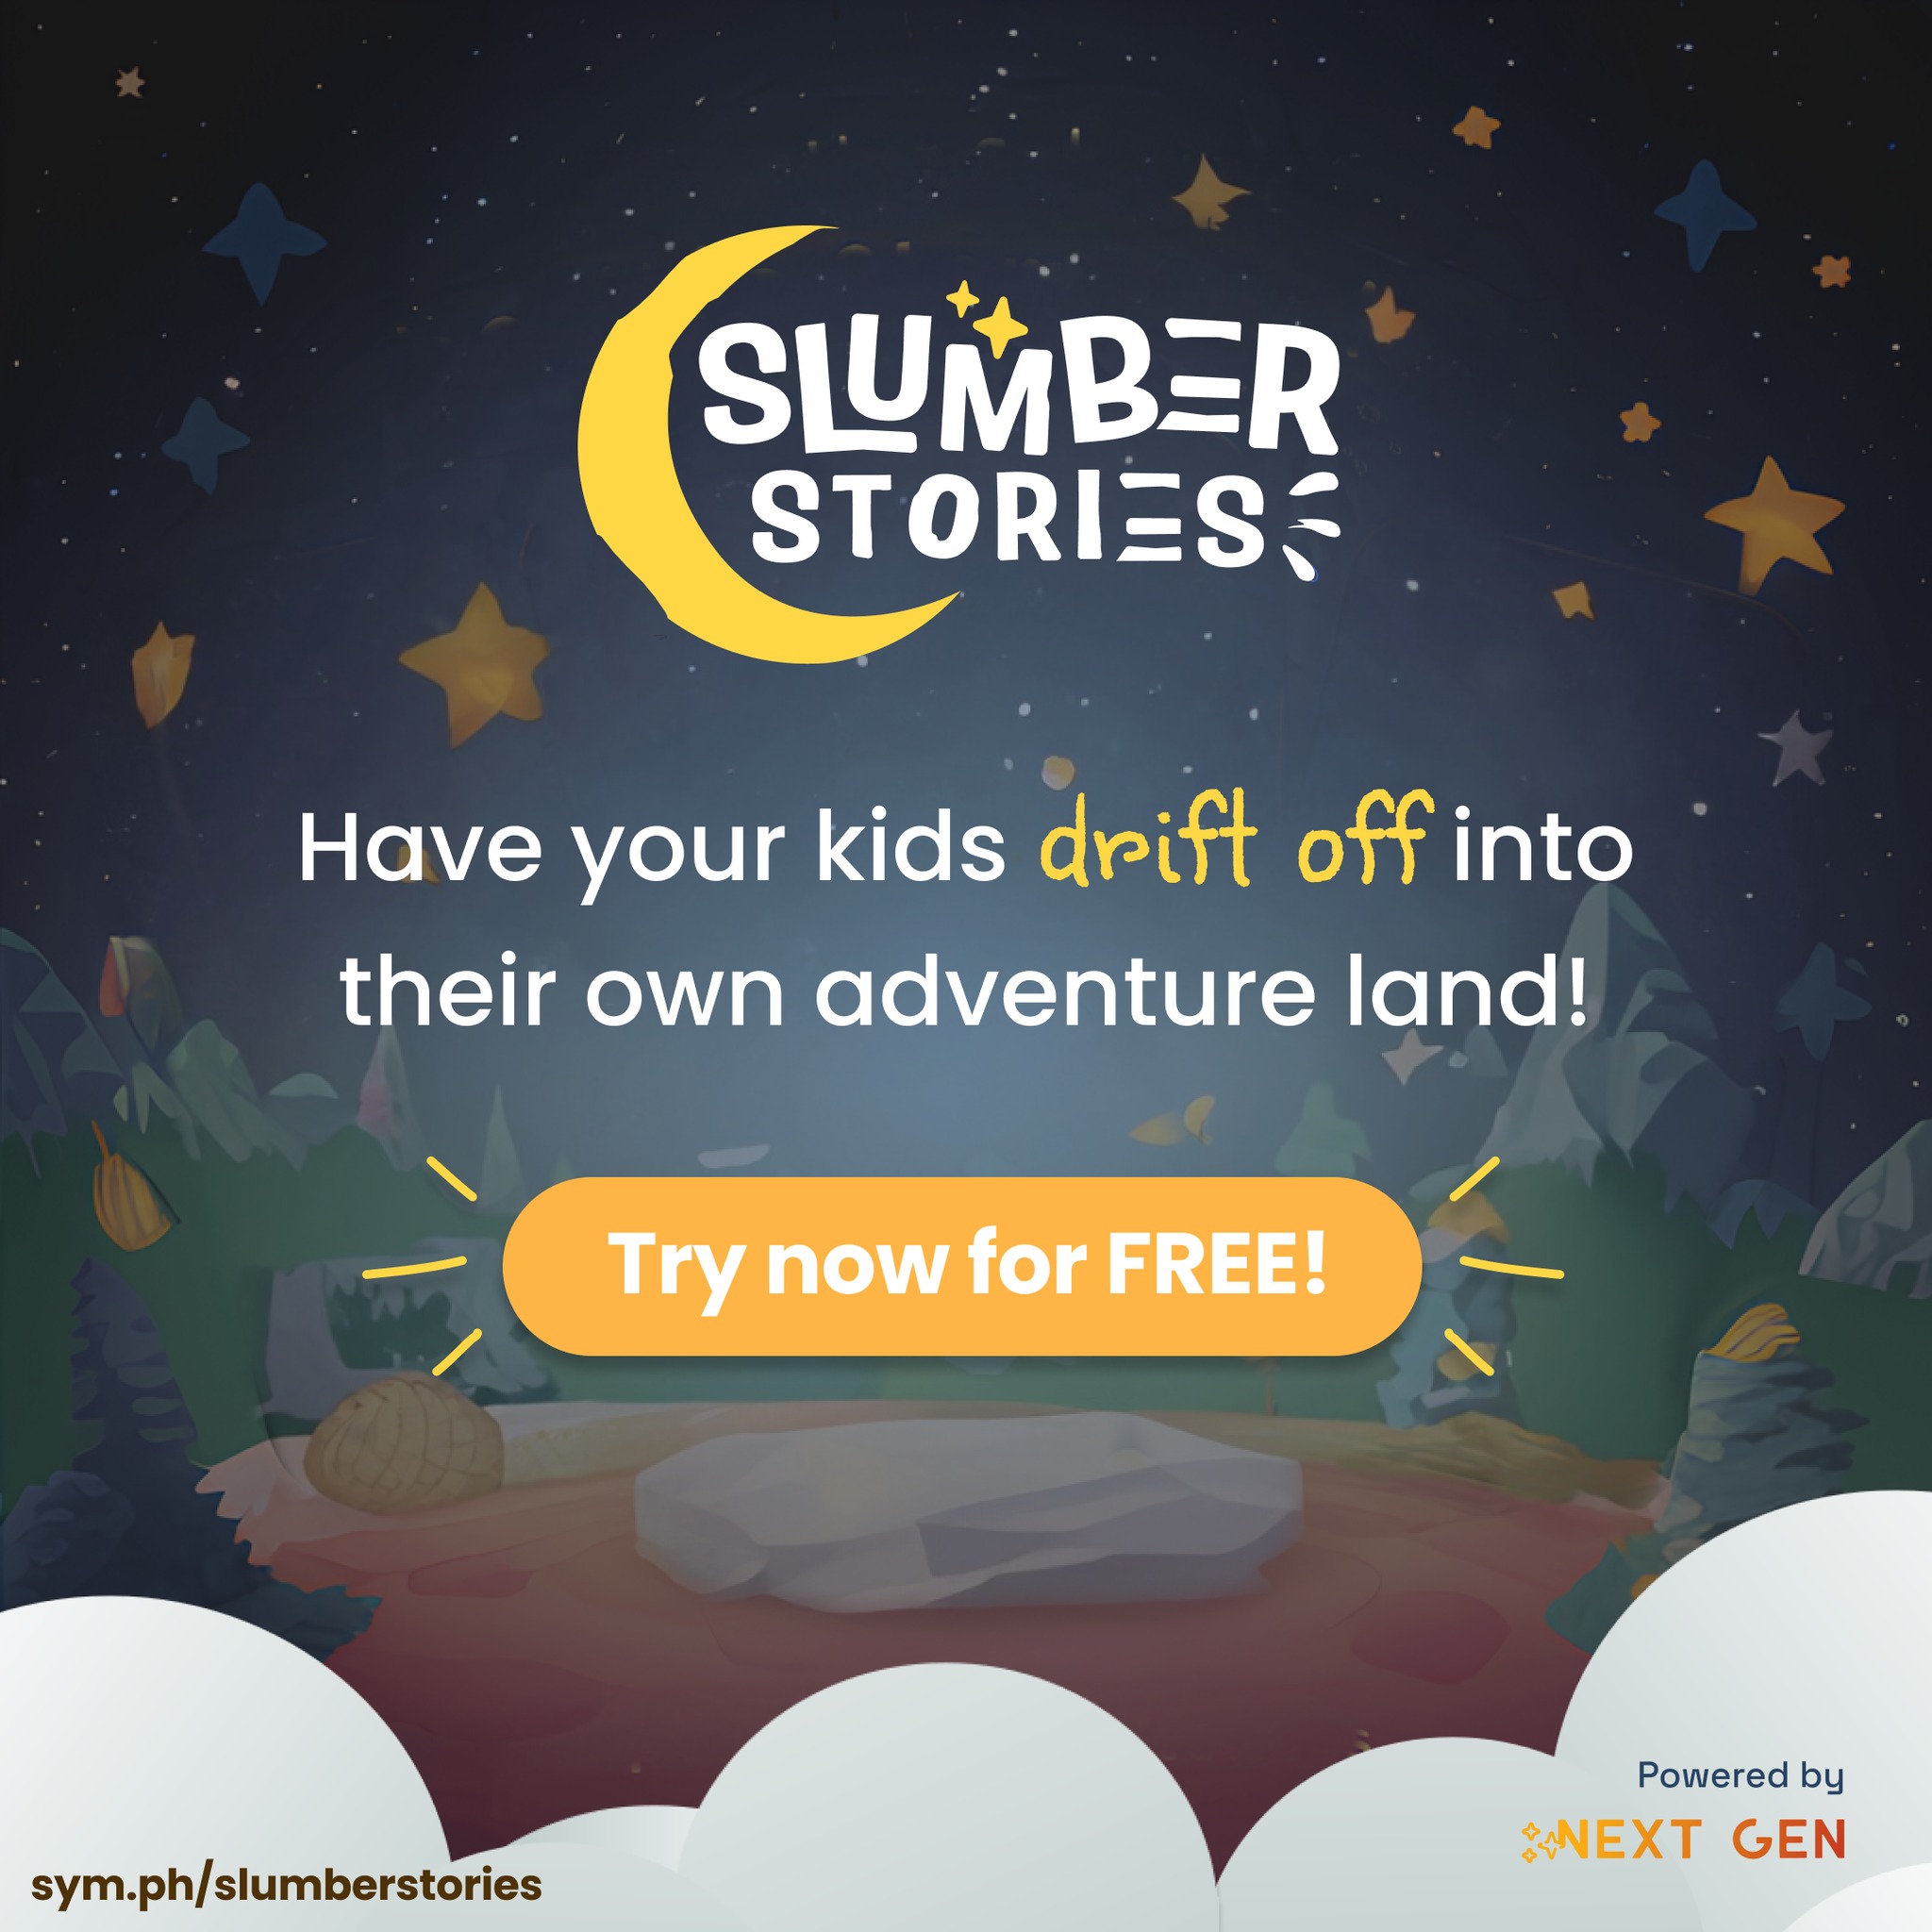 Have your kids drift off into their own adventure land